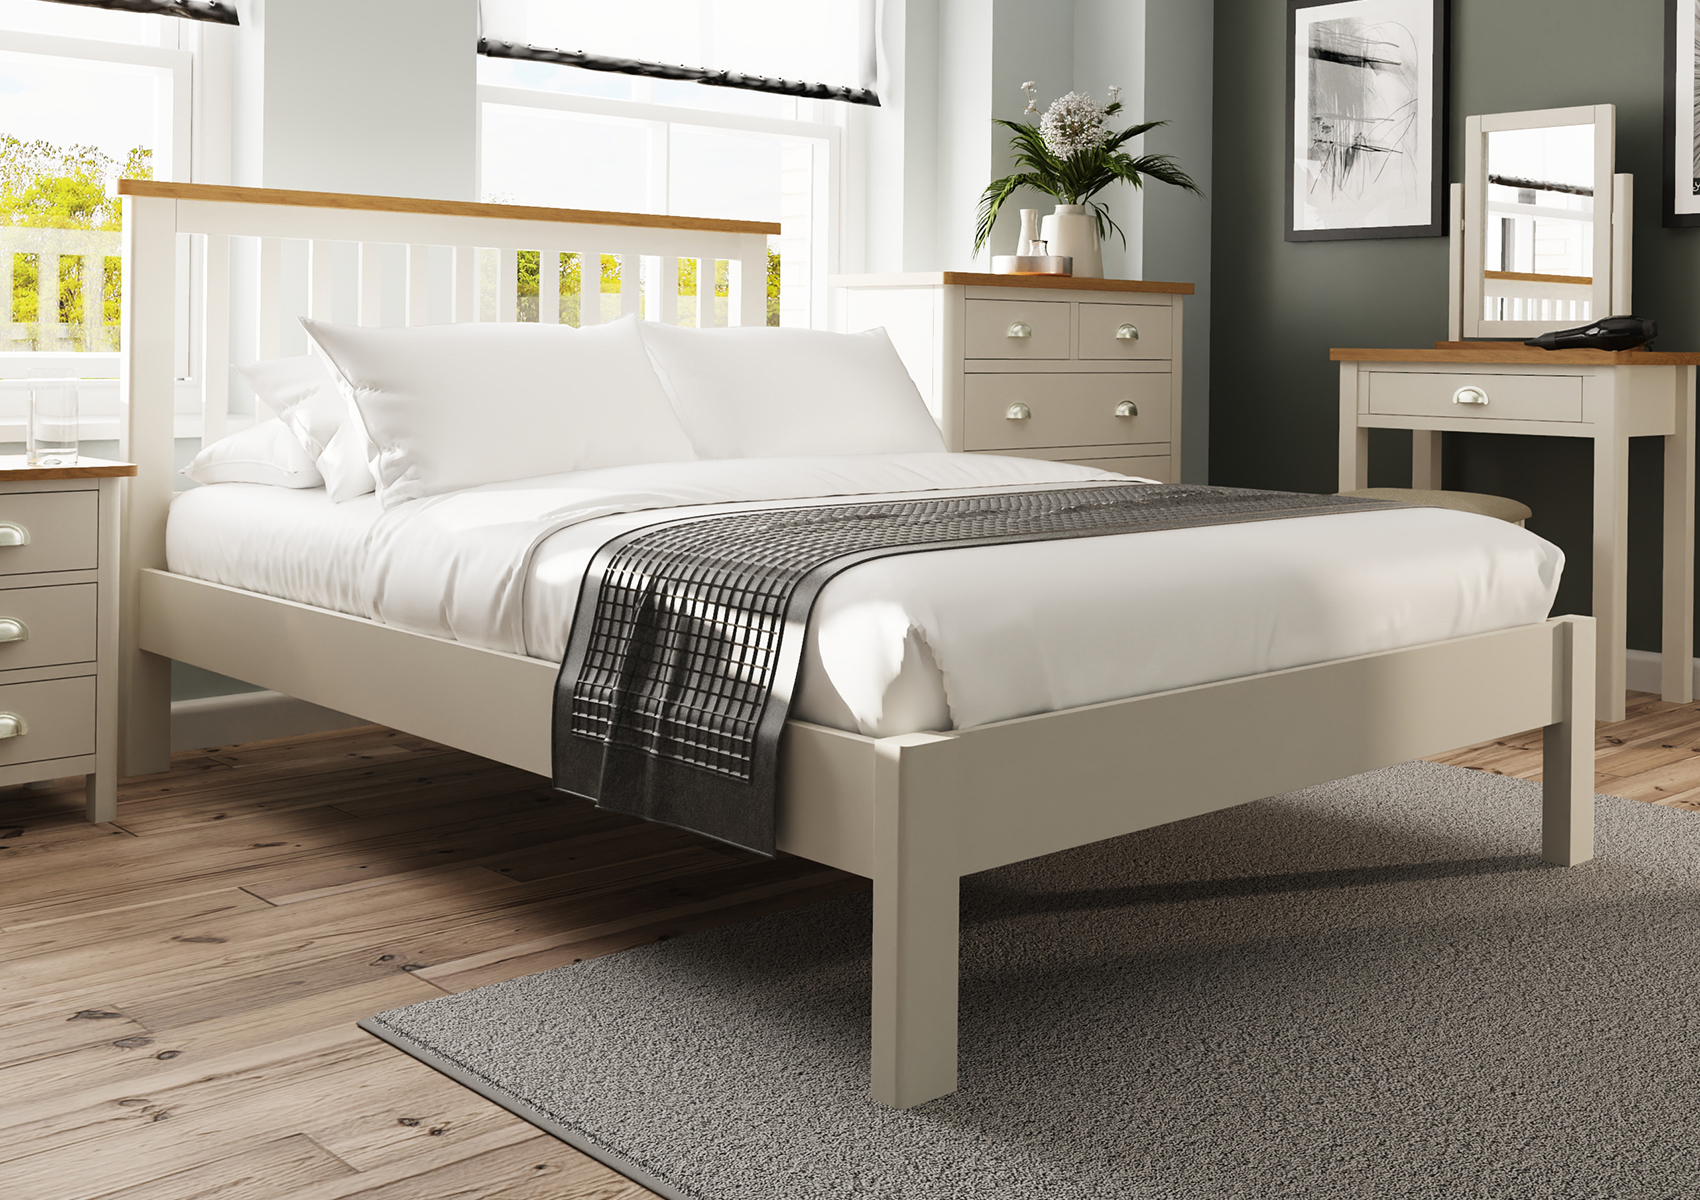 View Radstock Truffle Wooden Bed Frame Time4Sleep information